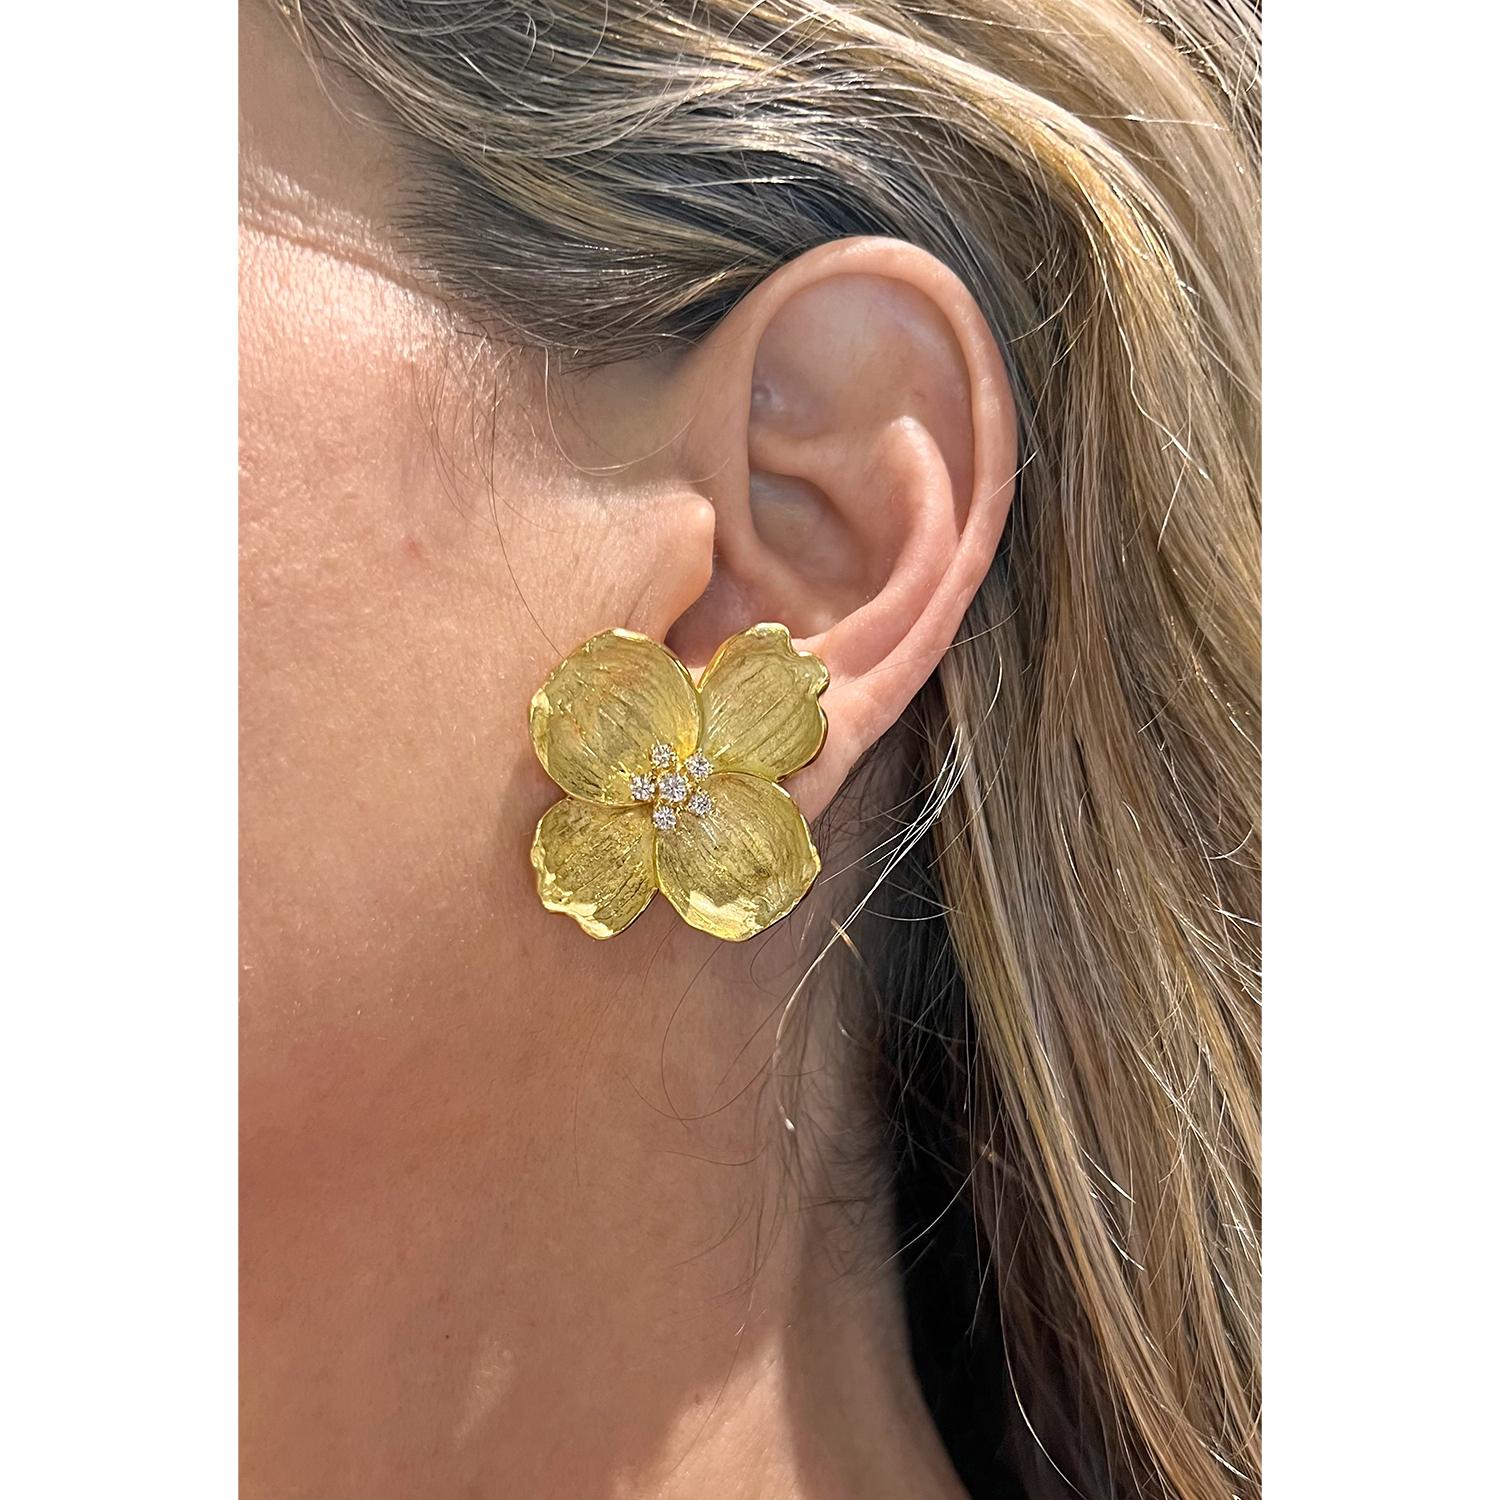 Celebrate the eternal beauty of nature with the exquisite RARE and hard to find 'large' dogwood flower earrings. Part of the American perennial flower collection, these were created by Tiffany & Co. in the 1980s to honor iconic flowers of North